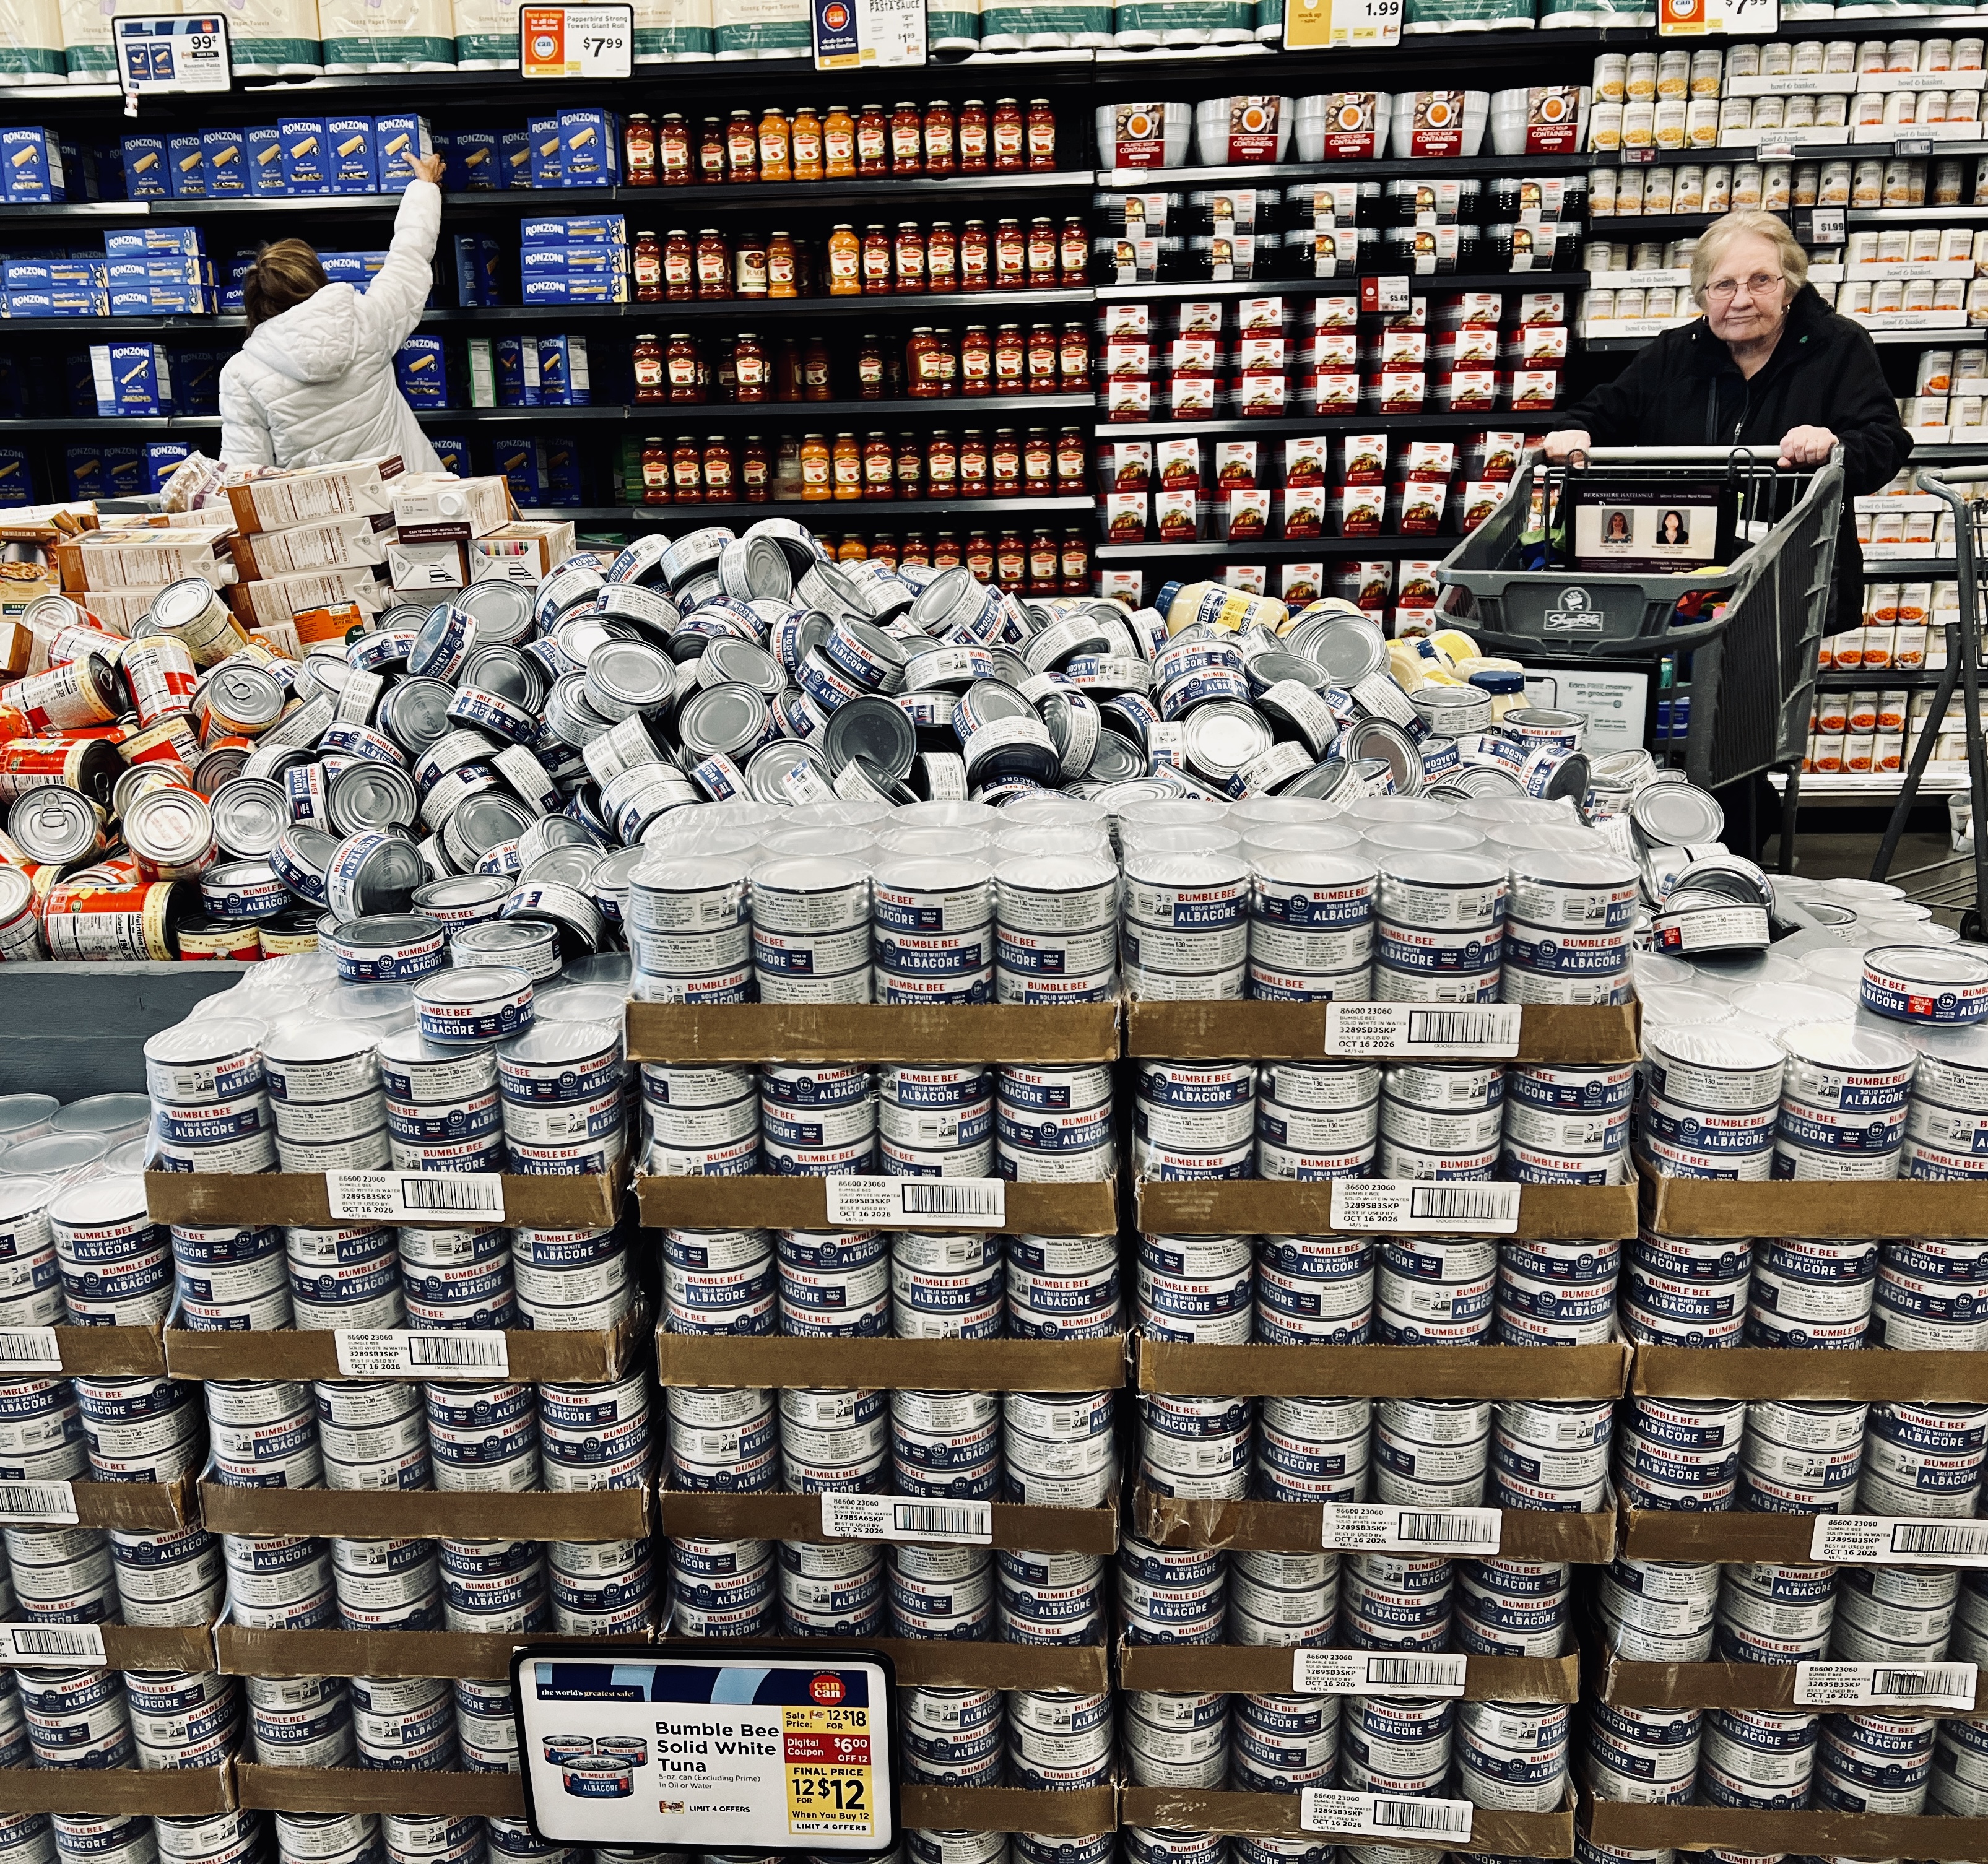 Piles of tuna cans in a grocery store.